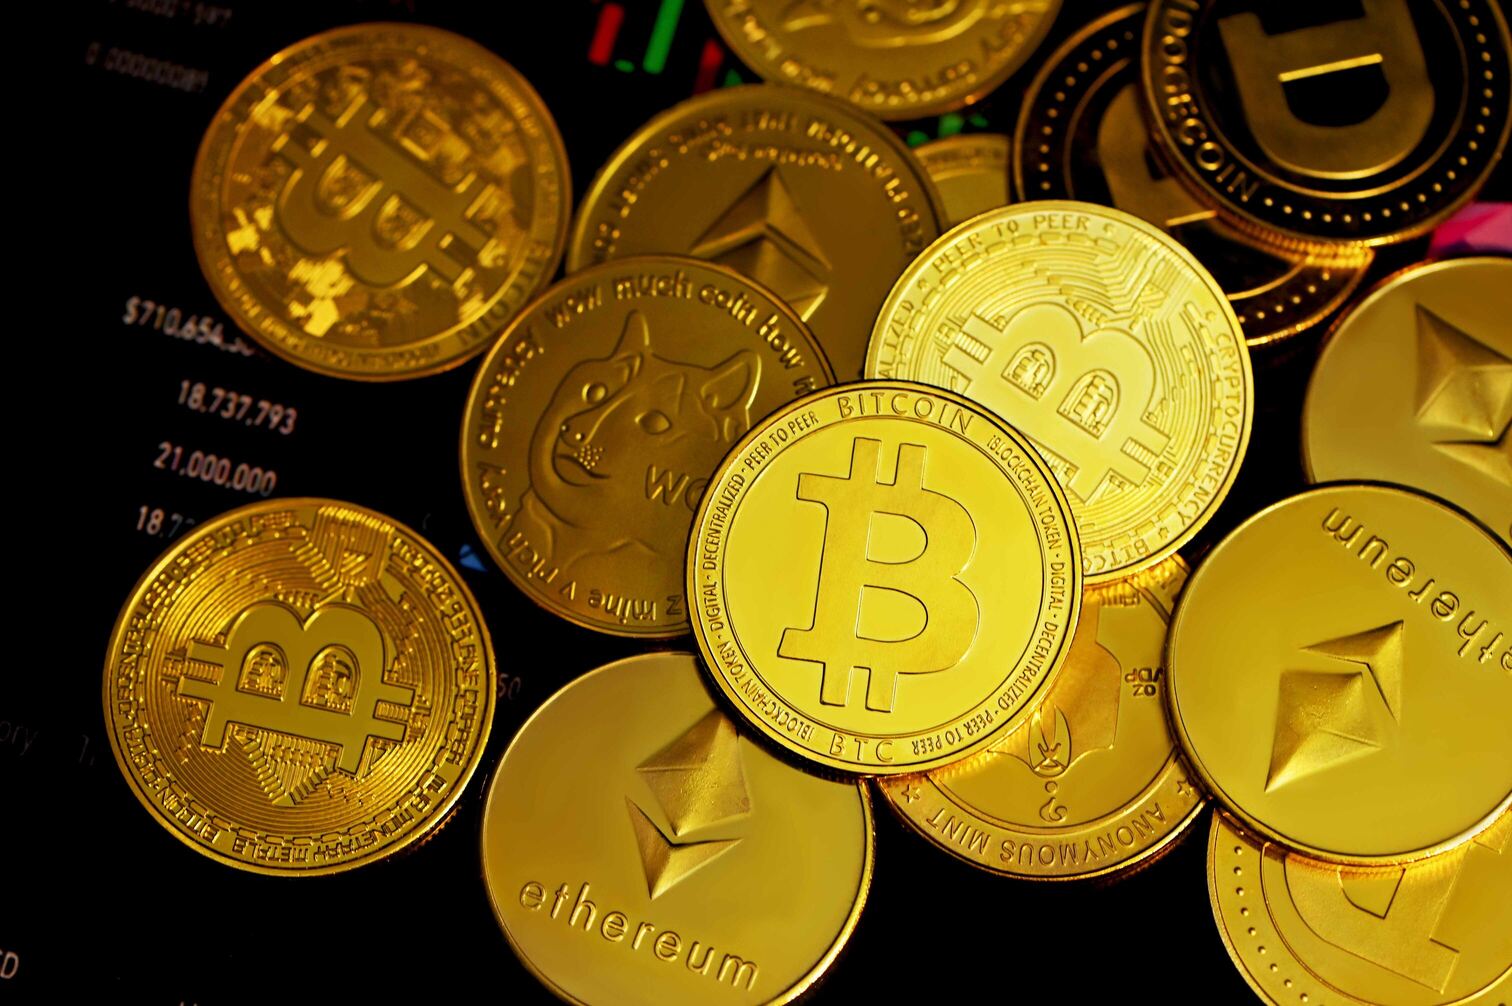 Gold cryptocurrency coins, such as Bitcoin, Ethereum, etc.